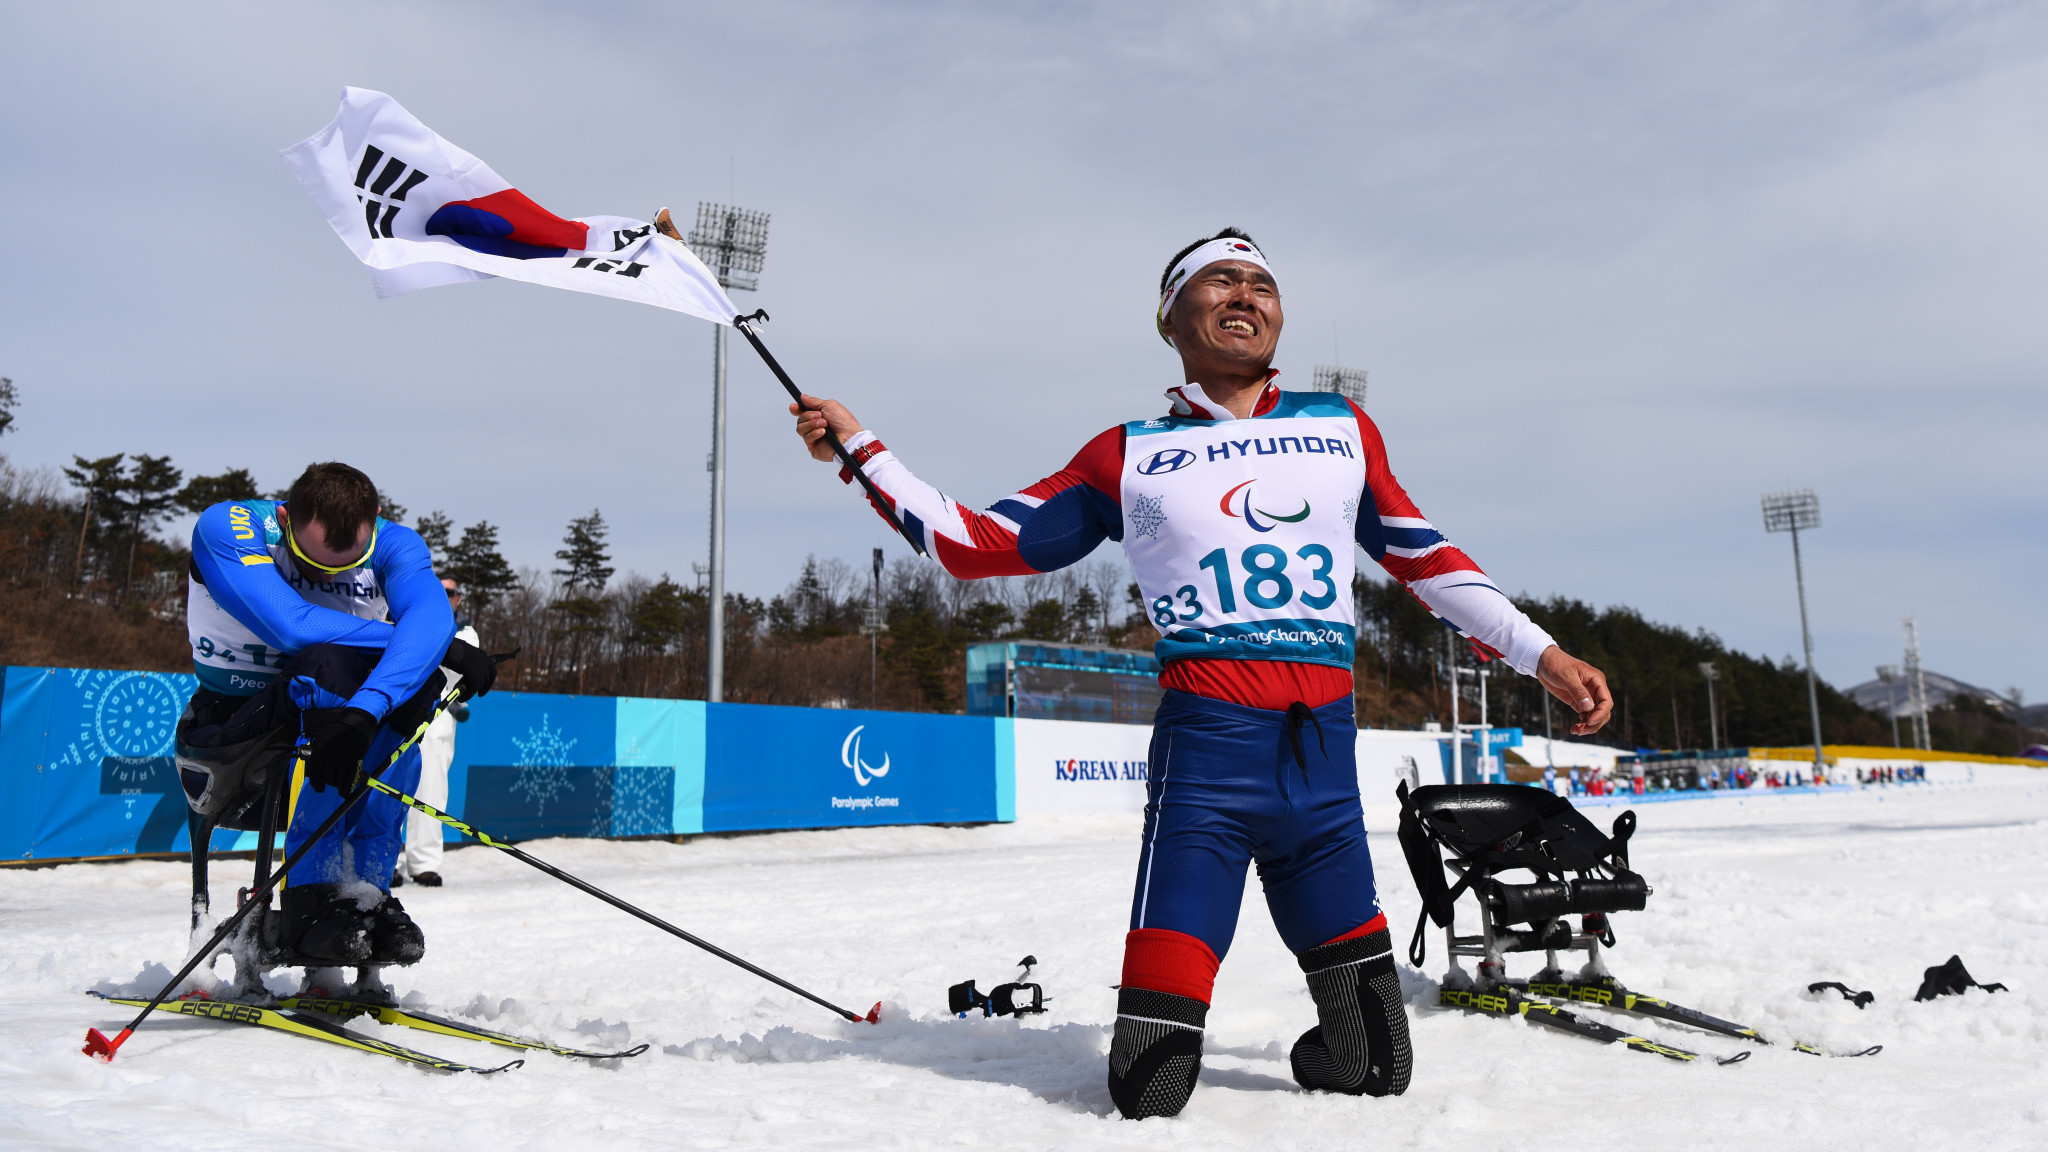 Hosts South Korea were among the countries to win a first-ever Winter Paralympic gold medal at Pyeongchang 2018, thanks to Sin Eui Hyun's stunning performance in the men's cross-country skiing 7.5 kilometres sitting race ©Getty Images